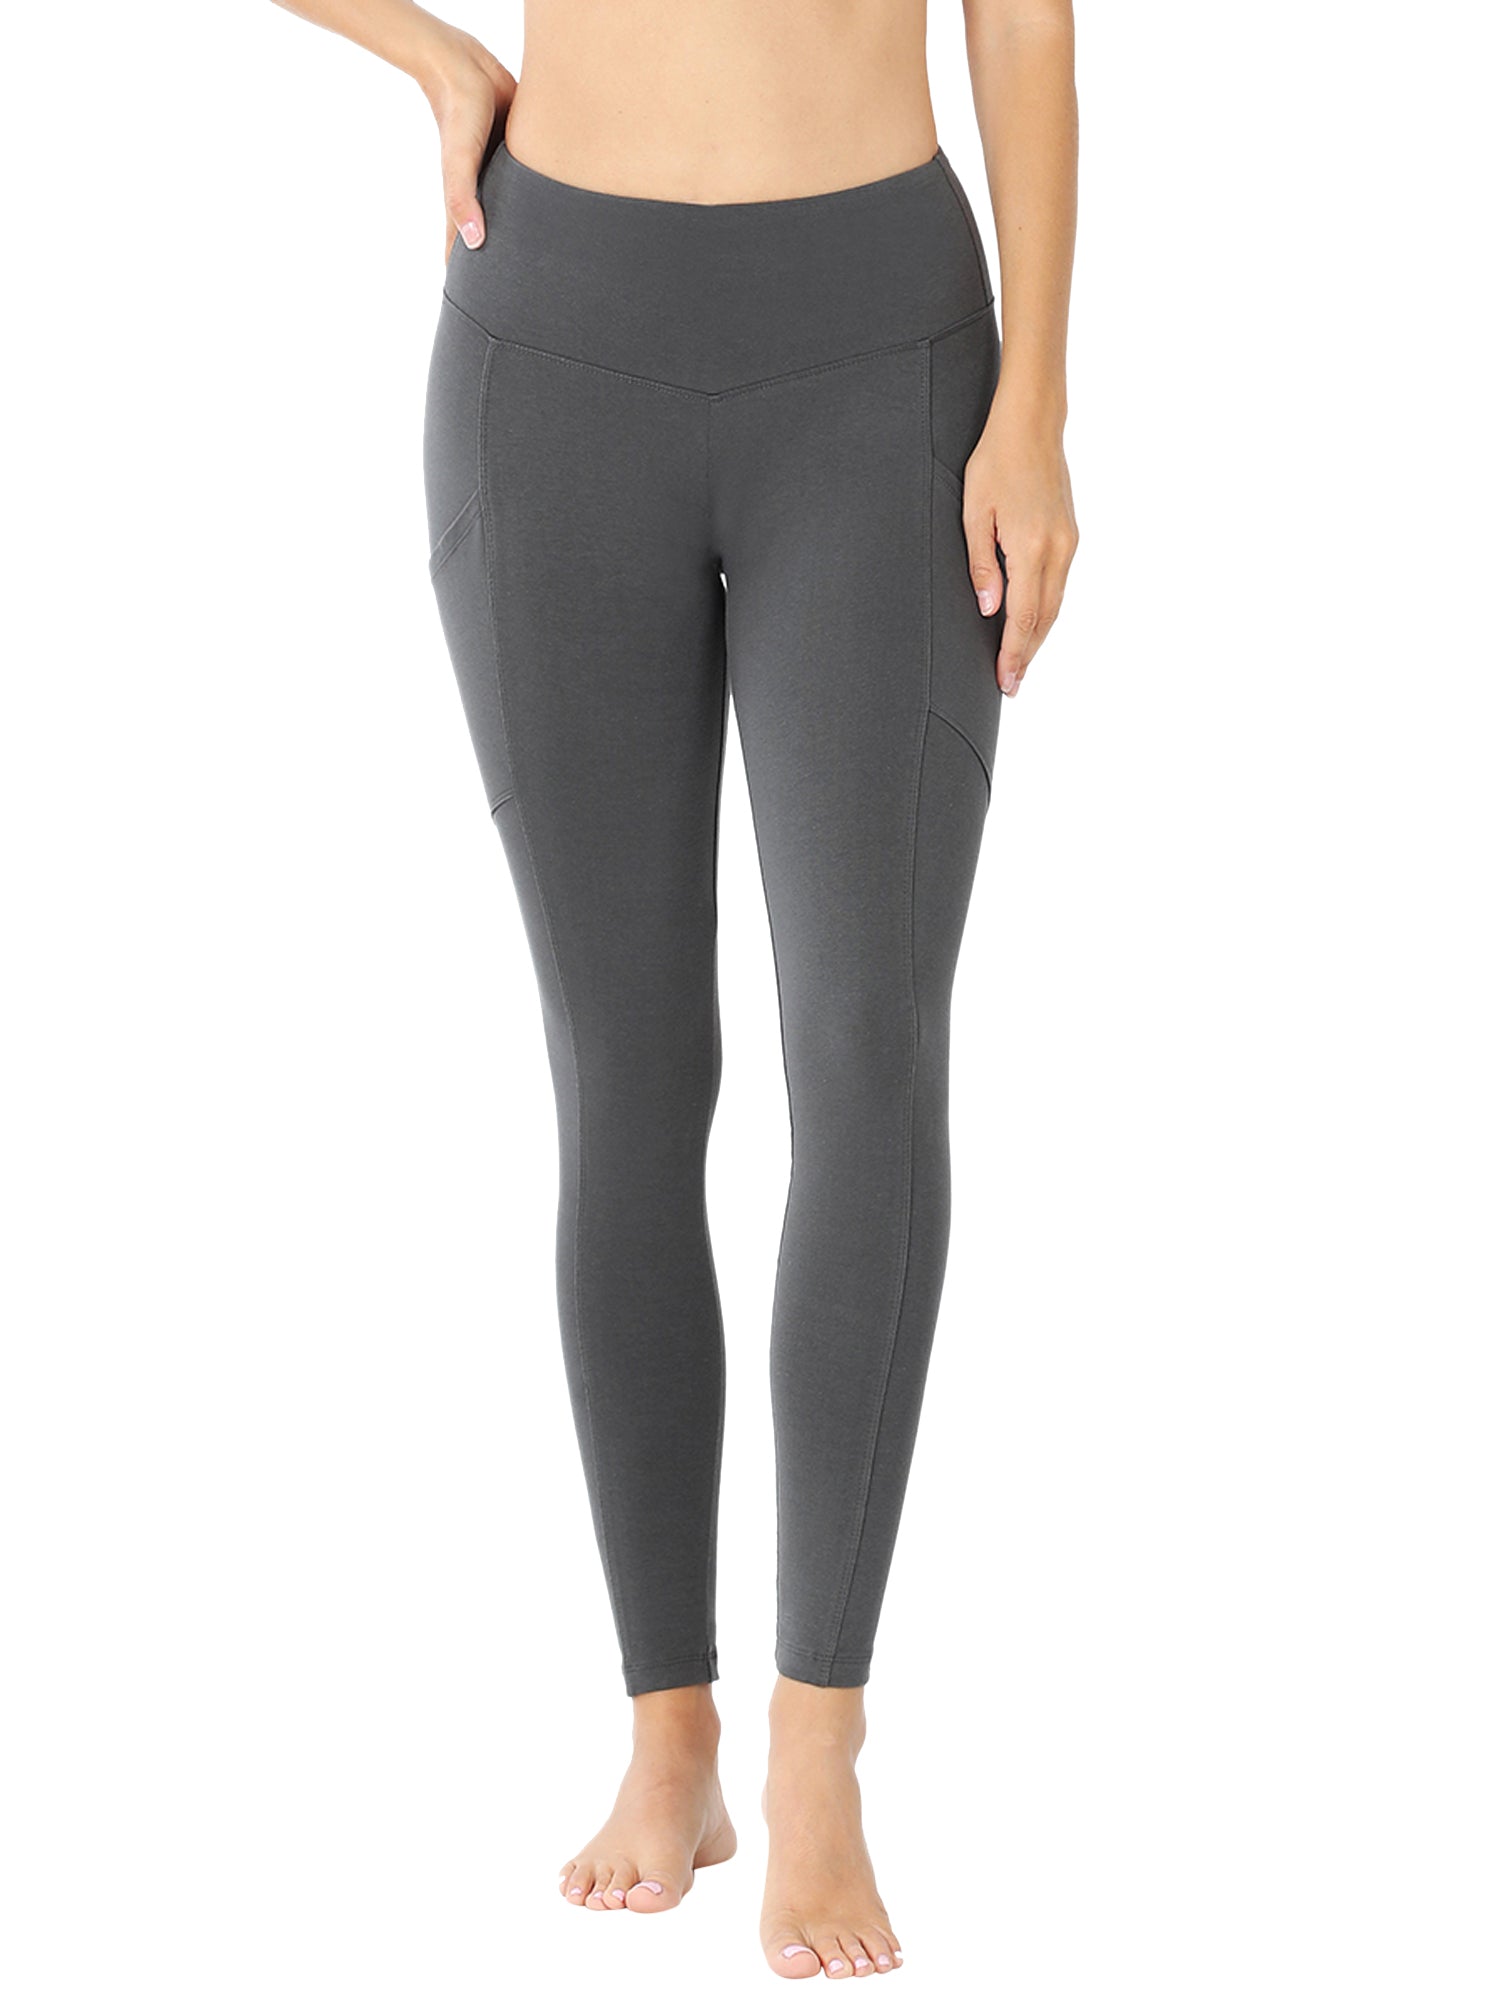 Women's Casual Stretch Active Wide Waistband Tight Leggings with Pockets